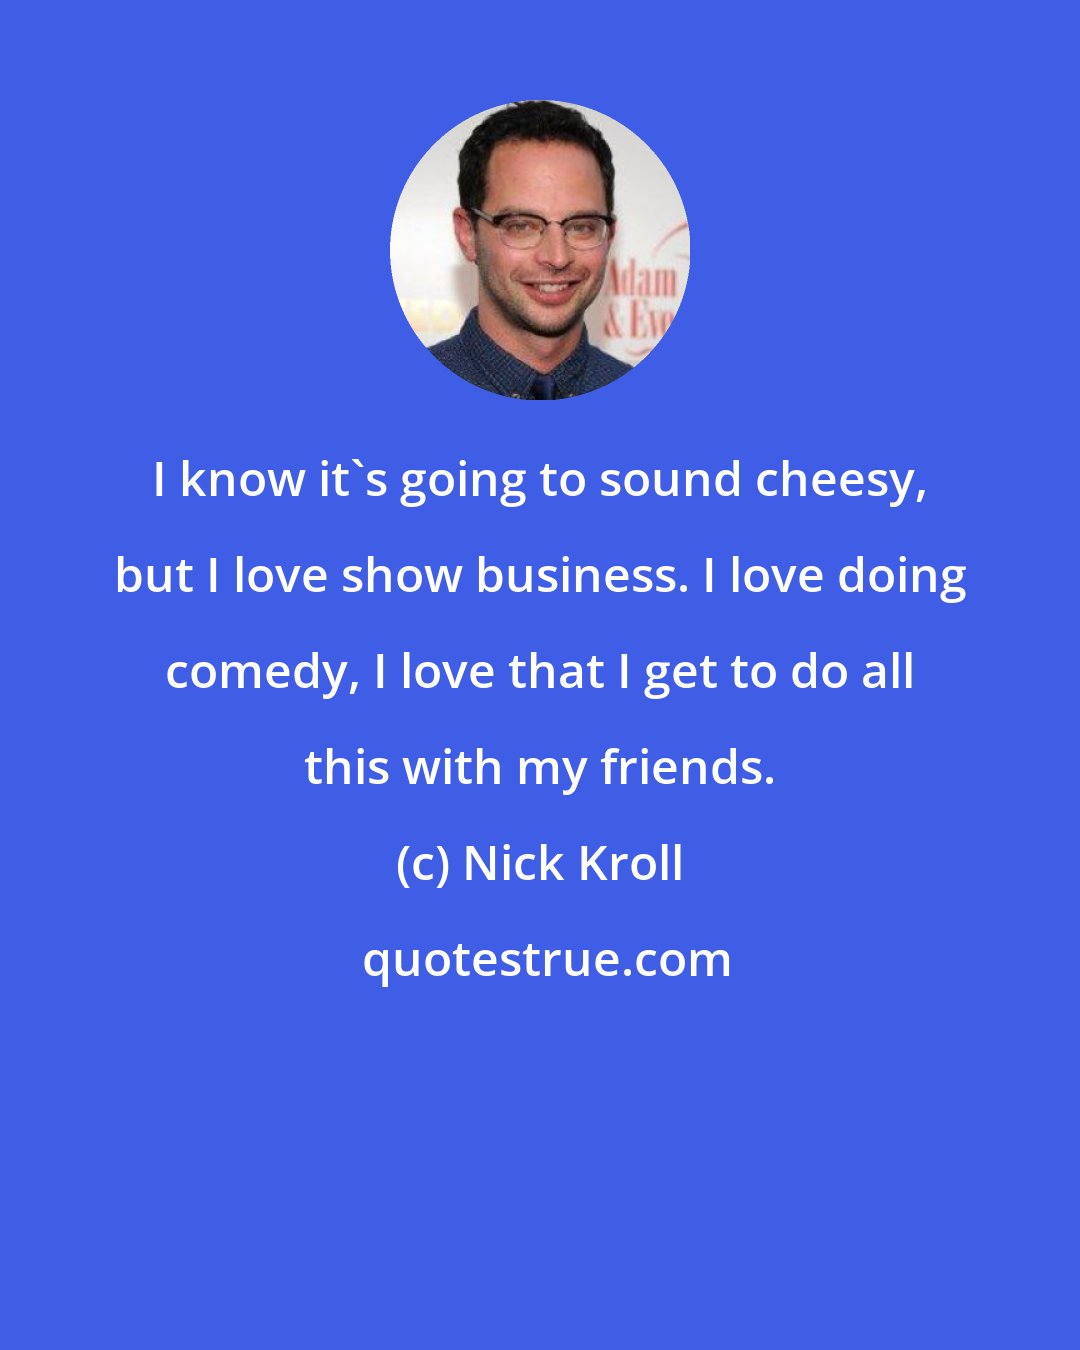 Nick Kroll: I know it's going to sound cheesy, but I love show business. I love doing comedy, I love that I get to do all this with my friends.